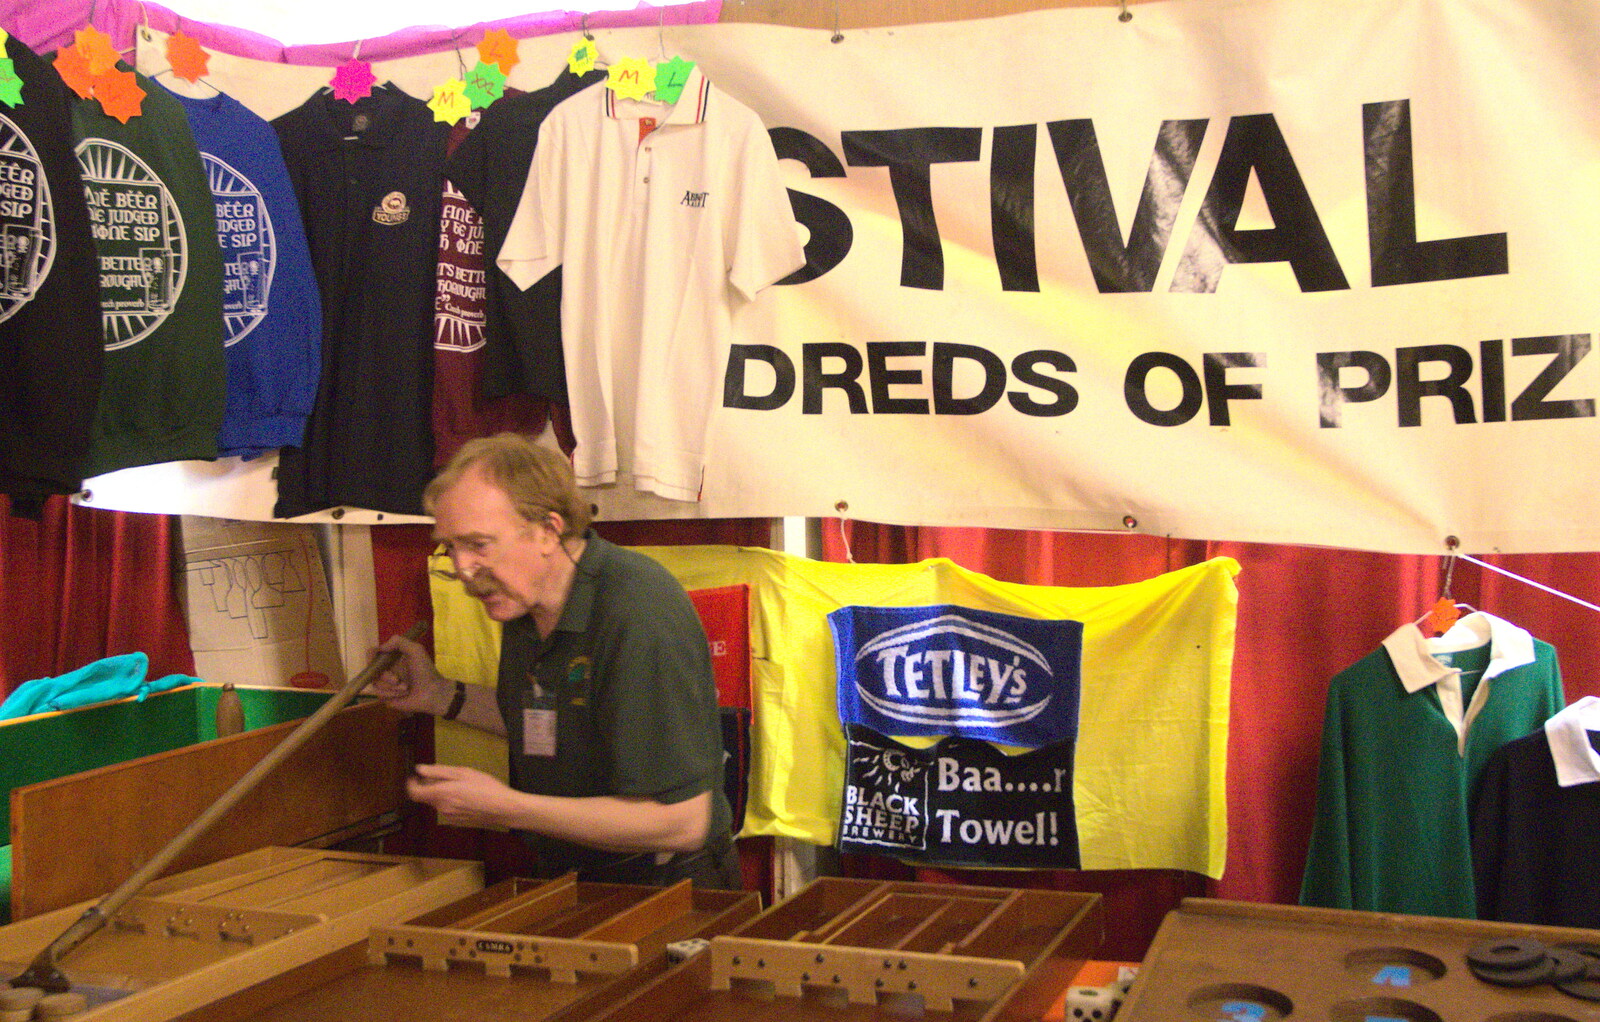 The CAMRA Dreds of Prize from The 35th Norwich Beer Festival, St. Andrew's Hall, Norwich - 31st October 2012